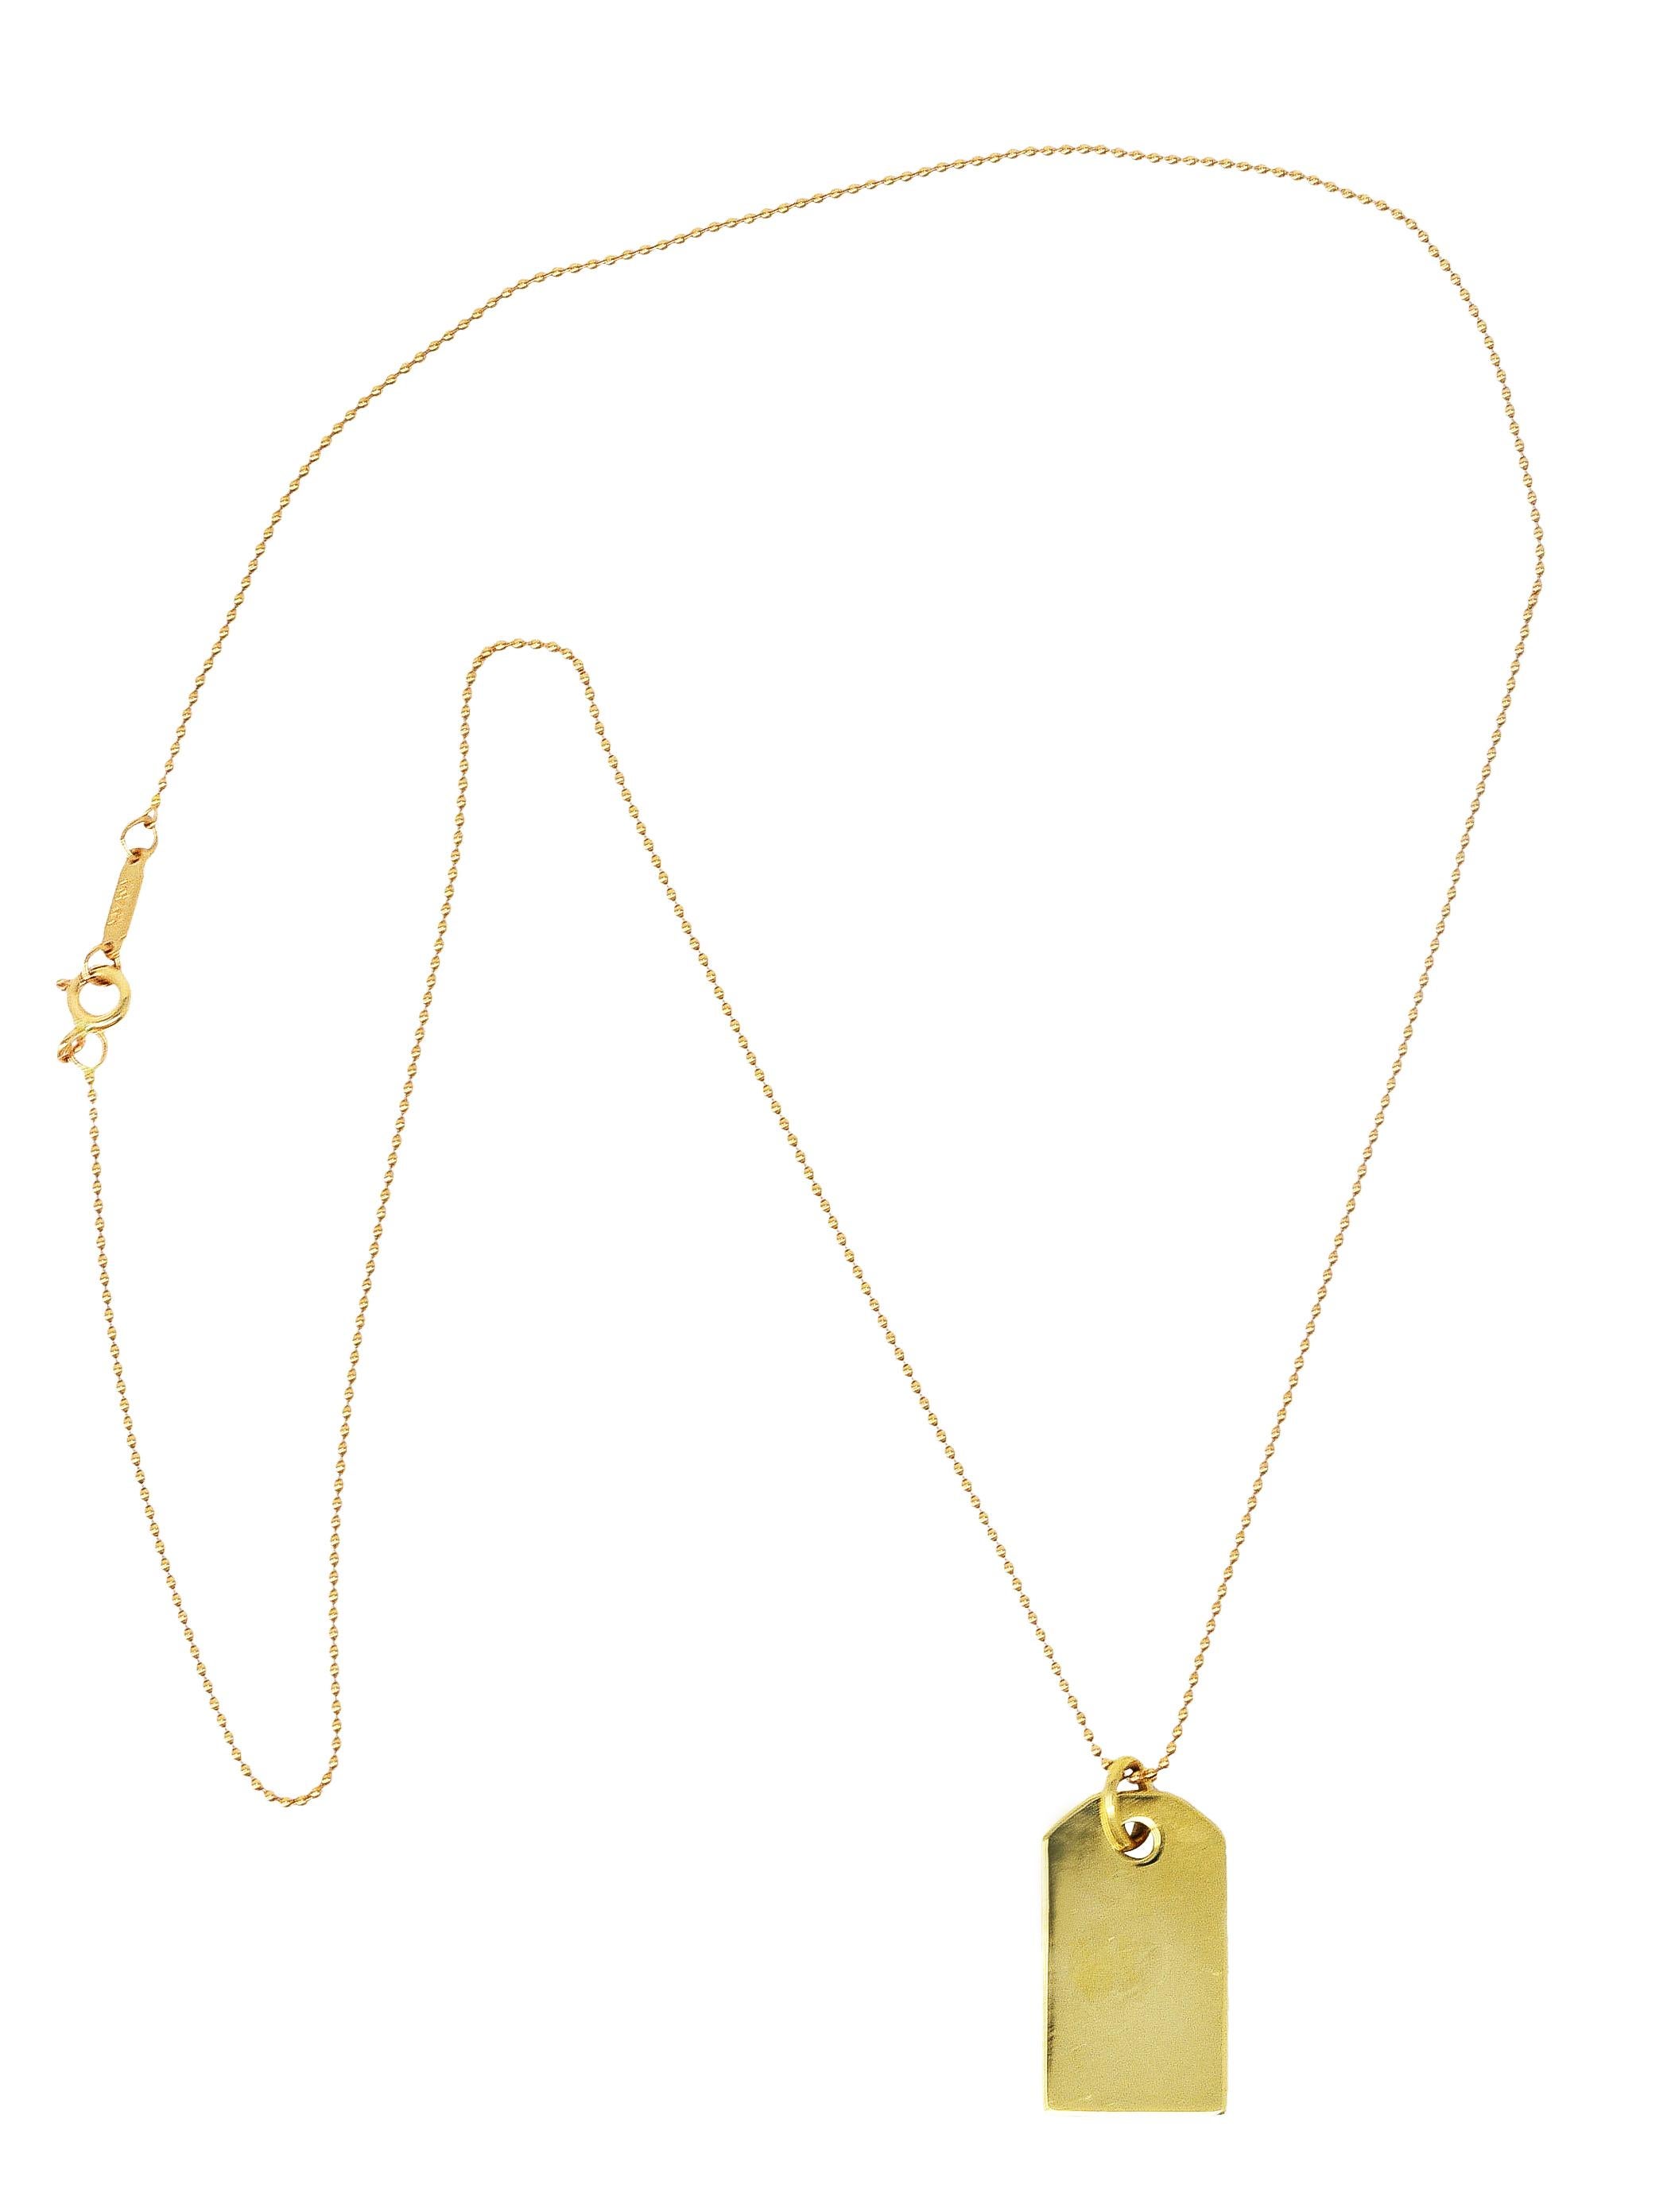 Necklace designed as bead style chain suspending tag pendant

Tag is highly polished with jump ring bale

In reference to the original Tiffany price tag

Completed by spring clasp closure

Stamped AU 750 for 18 karat gold

Fully signed Tiffany &